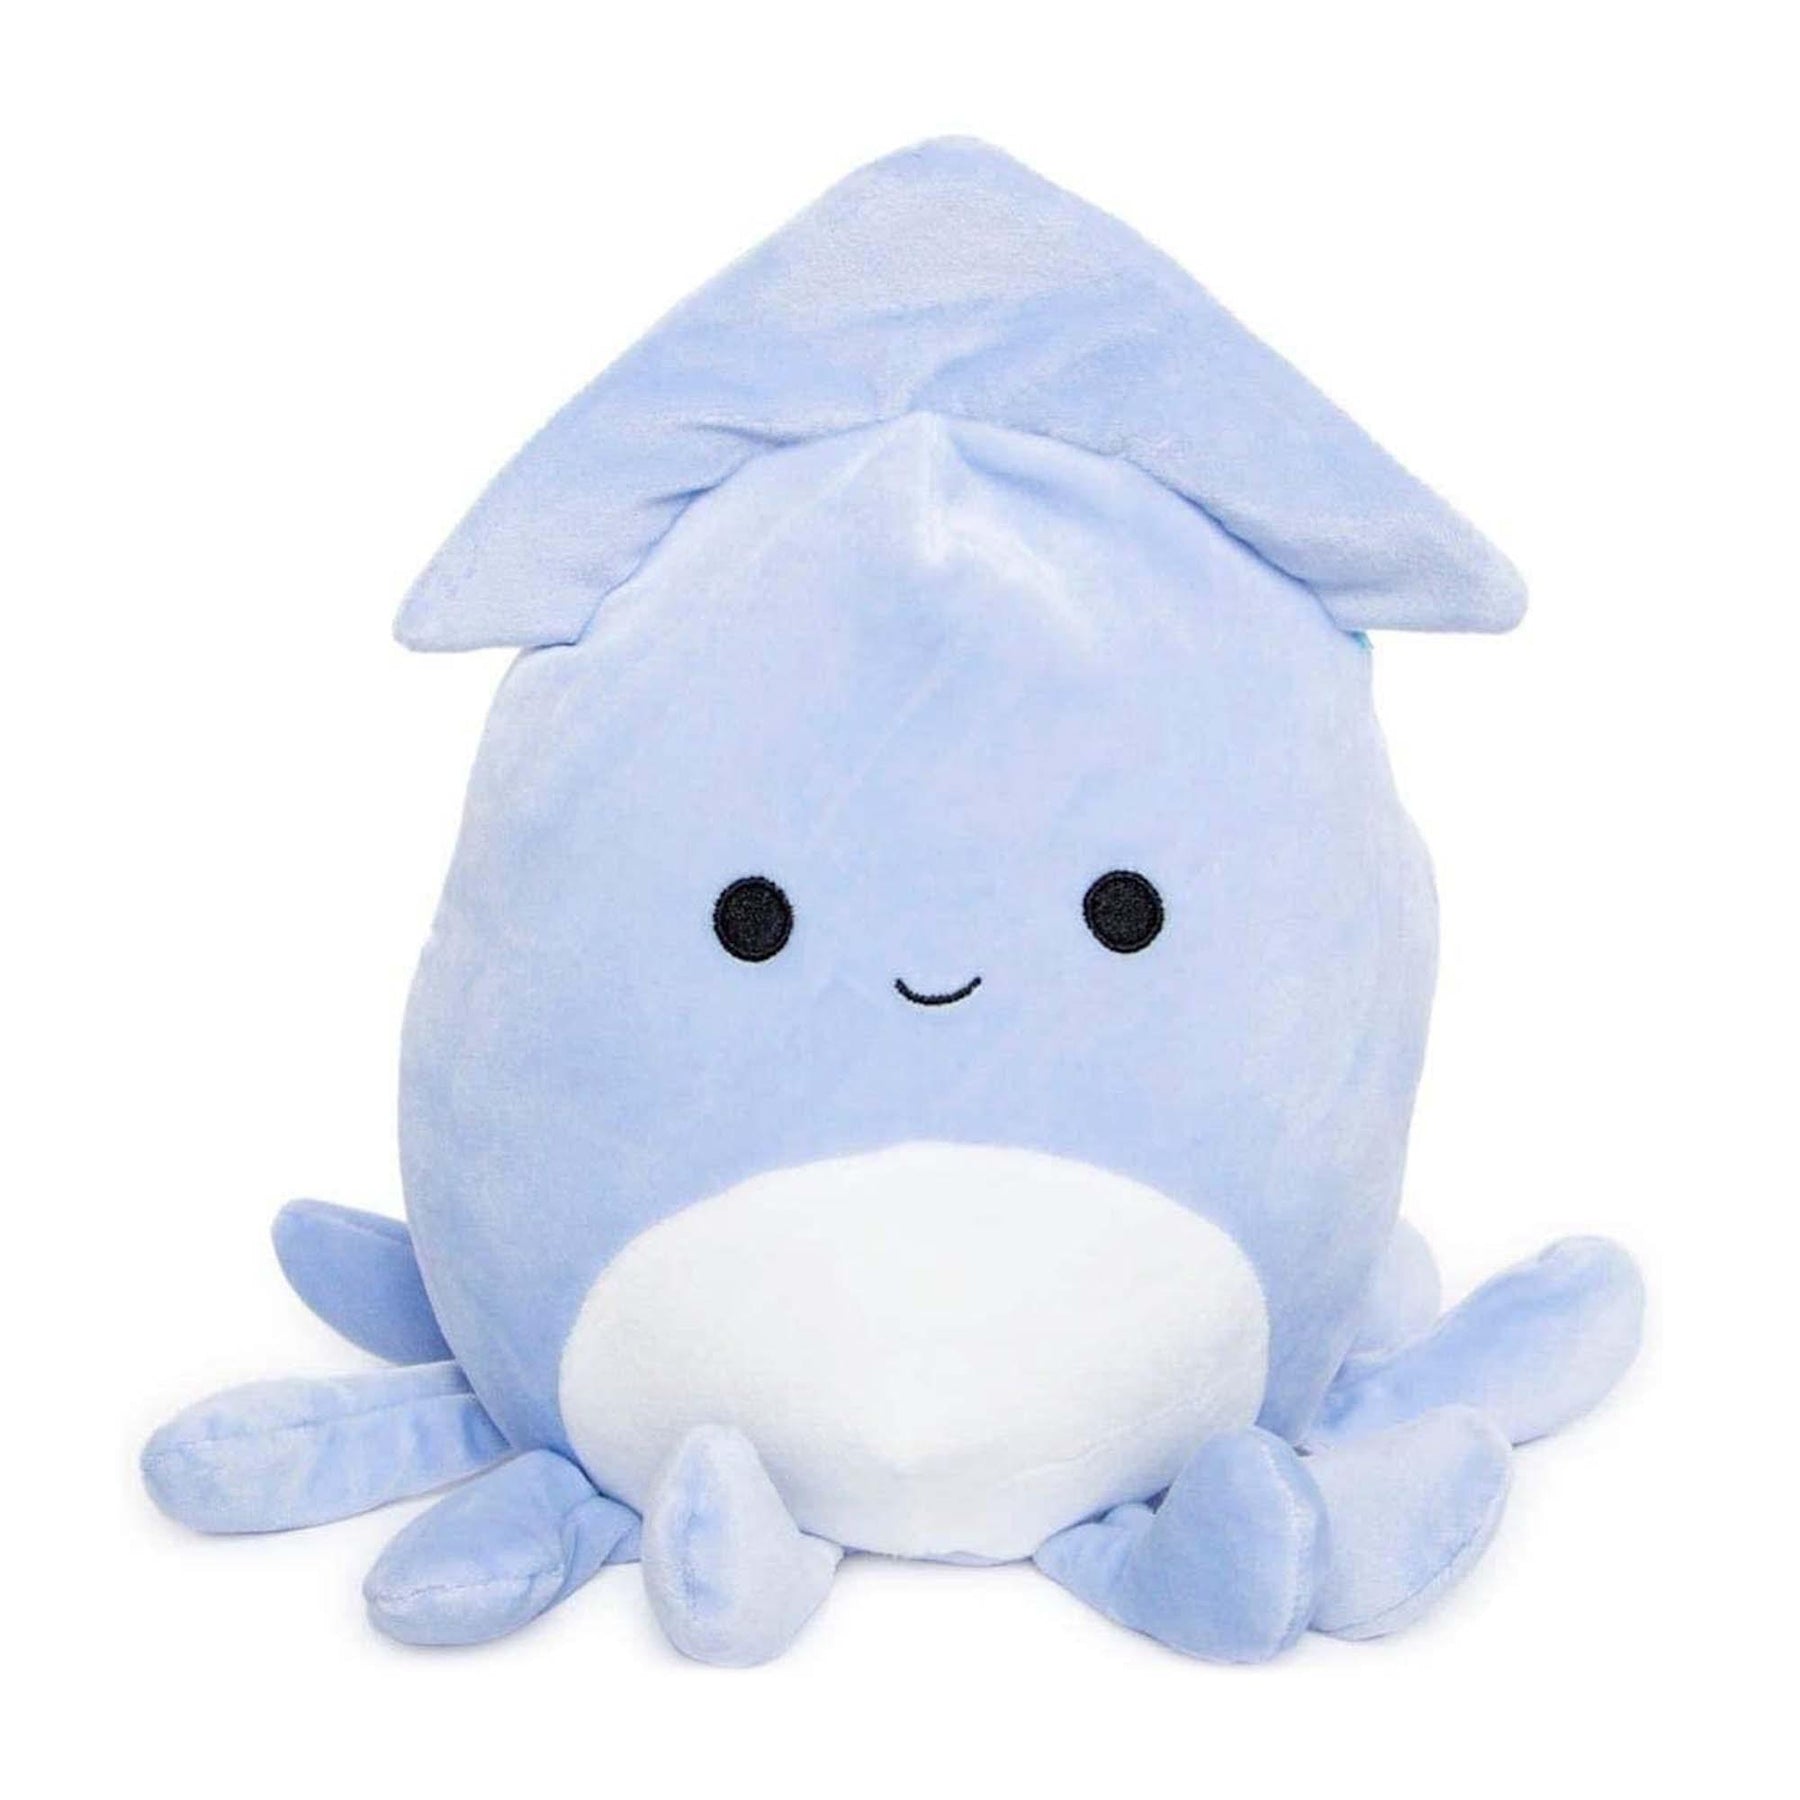 Squishmallow 8 Inch Sealife Plush | Stacy the Squid